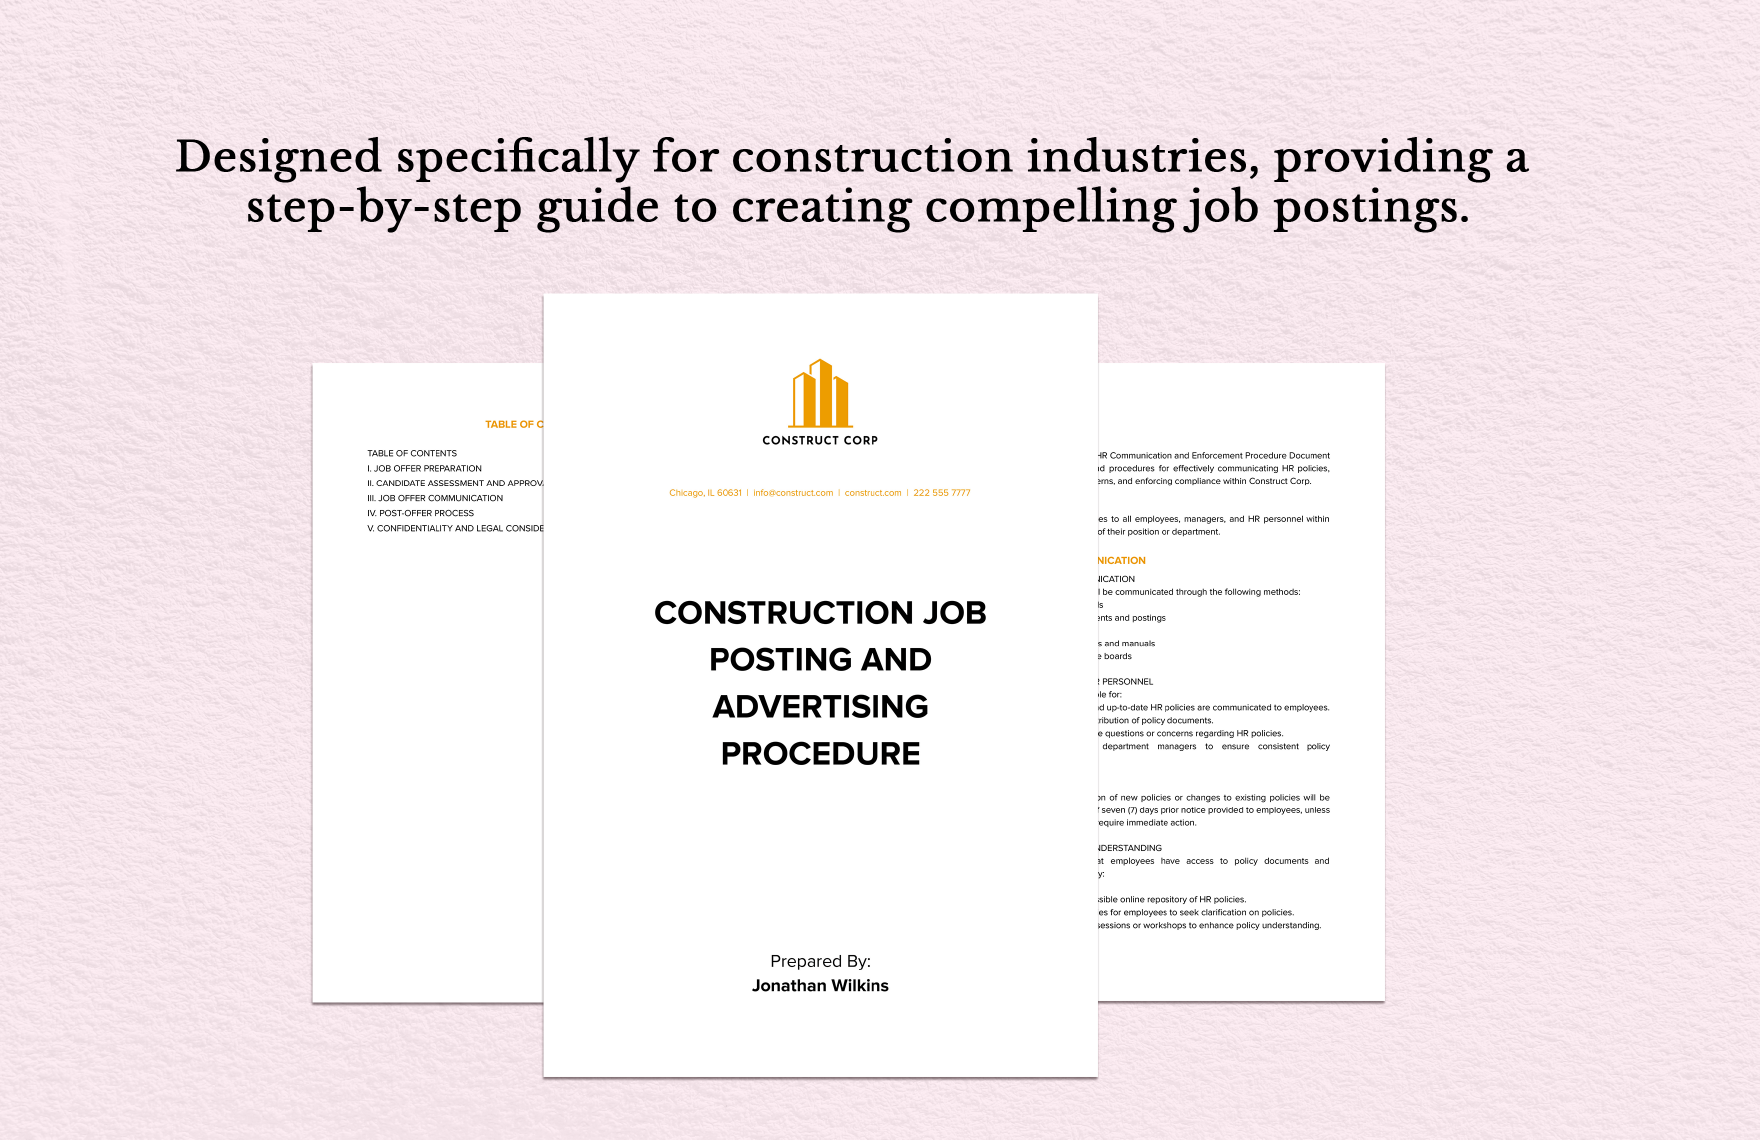 Construction Job Posting and Advertising Procedure 